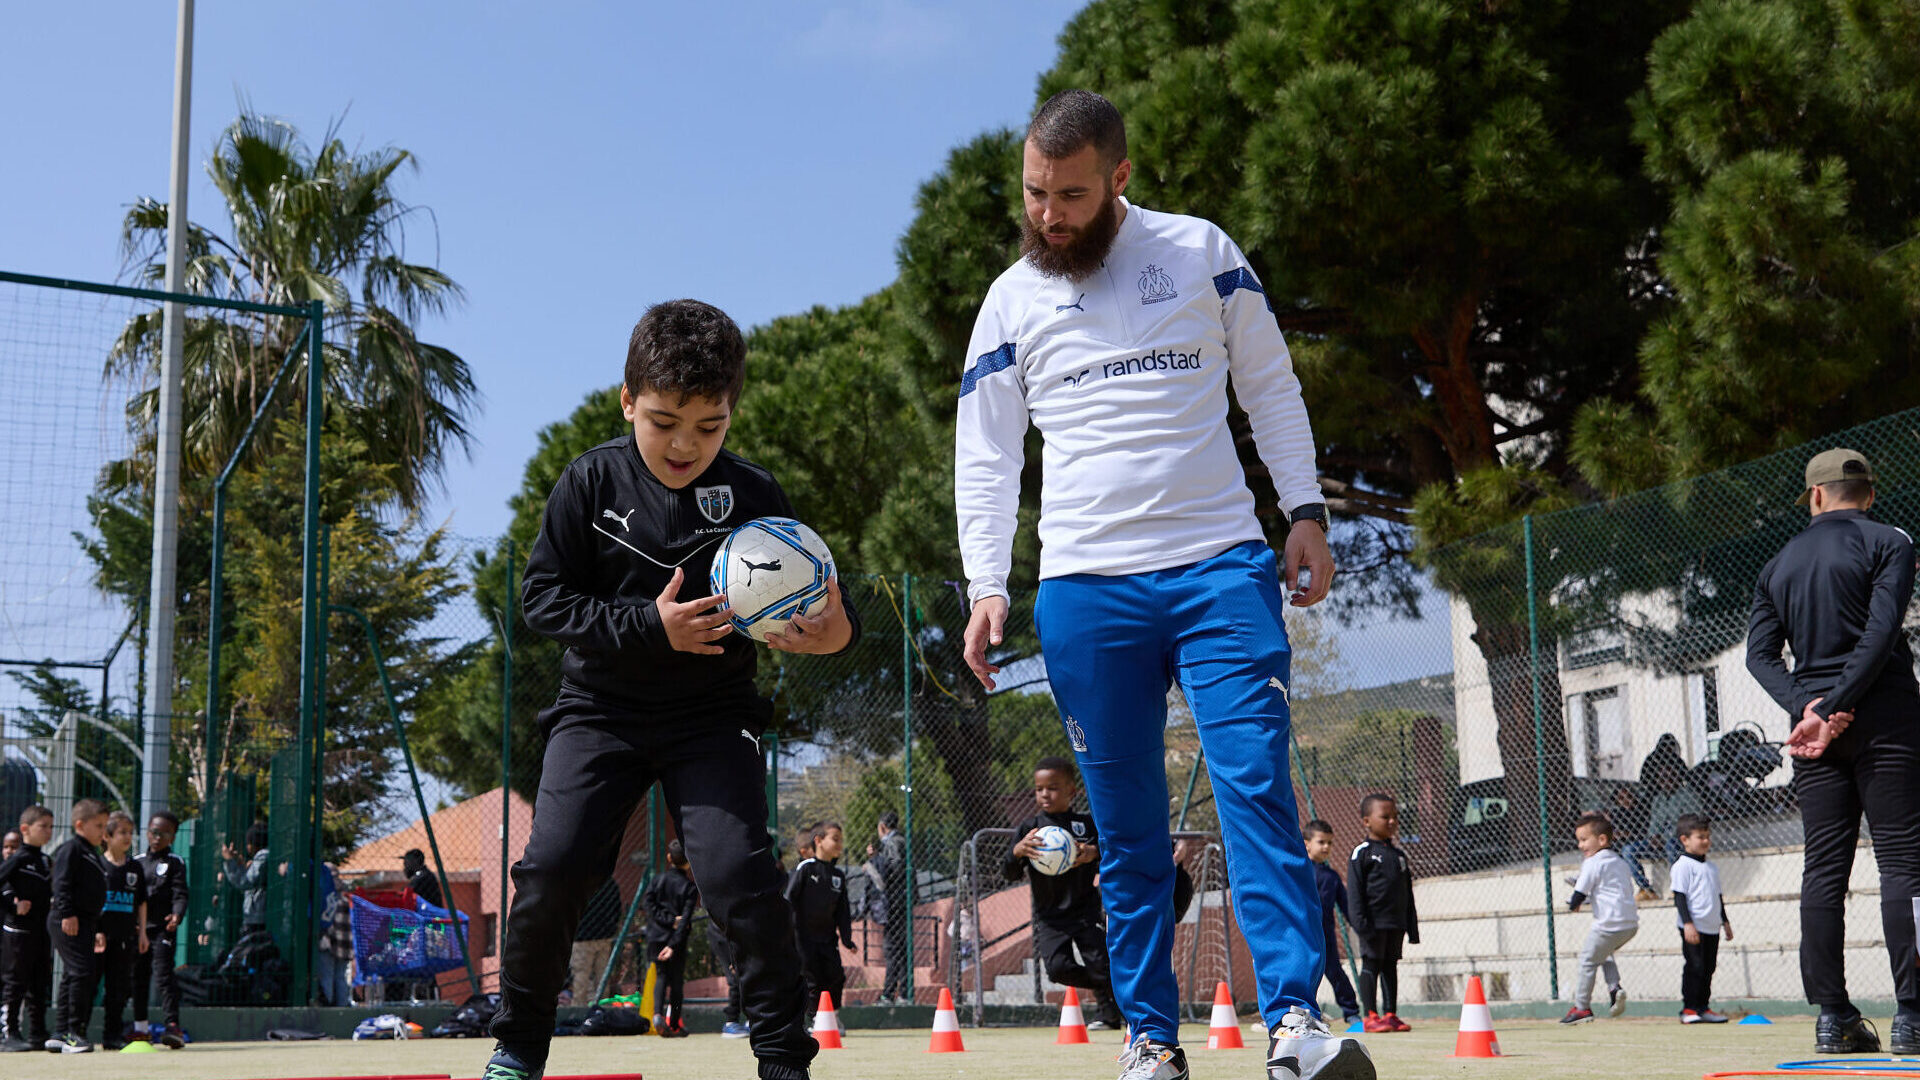 Olympique de Marseille coach working on drills with a young FC La Castellane player